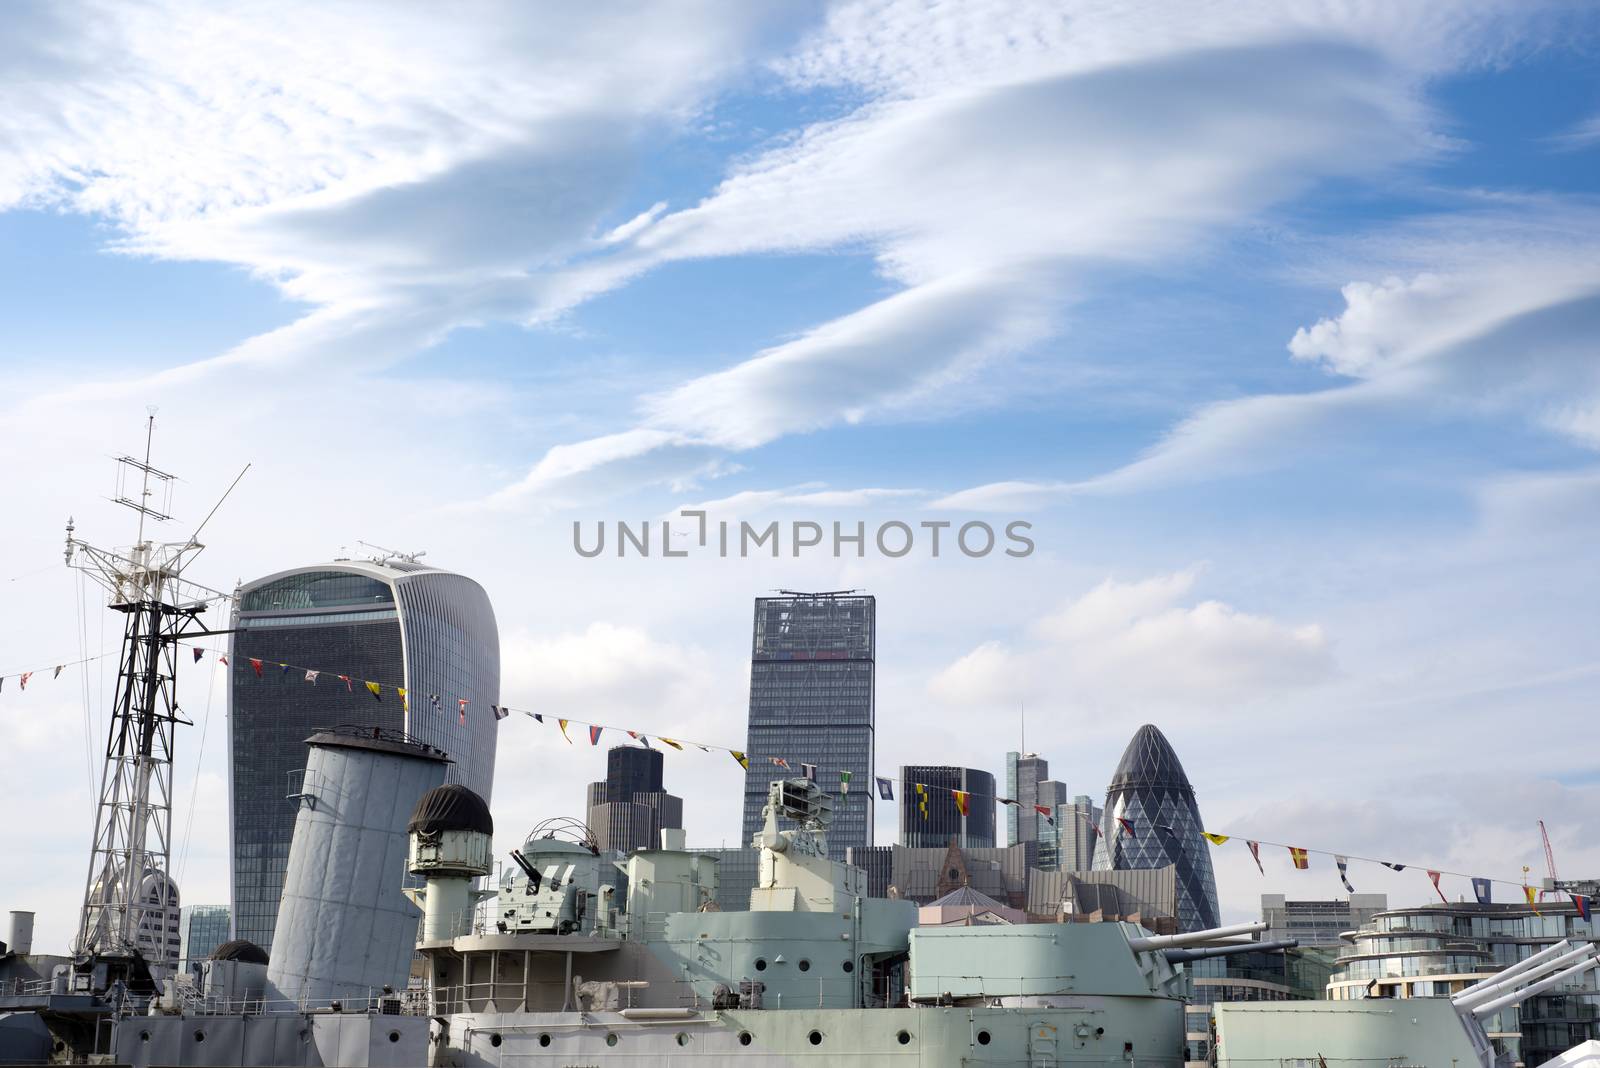 hms belfast and the city of london by morrbyte